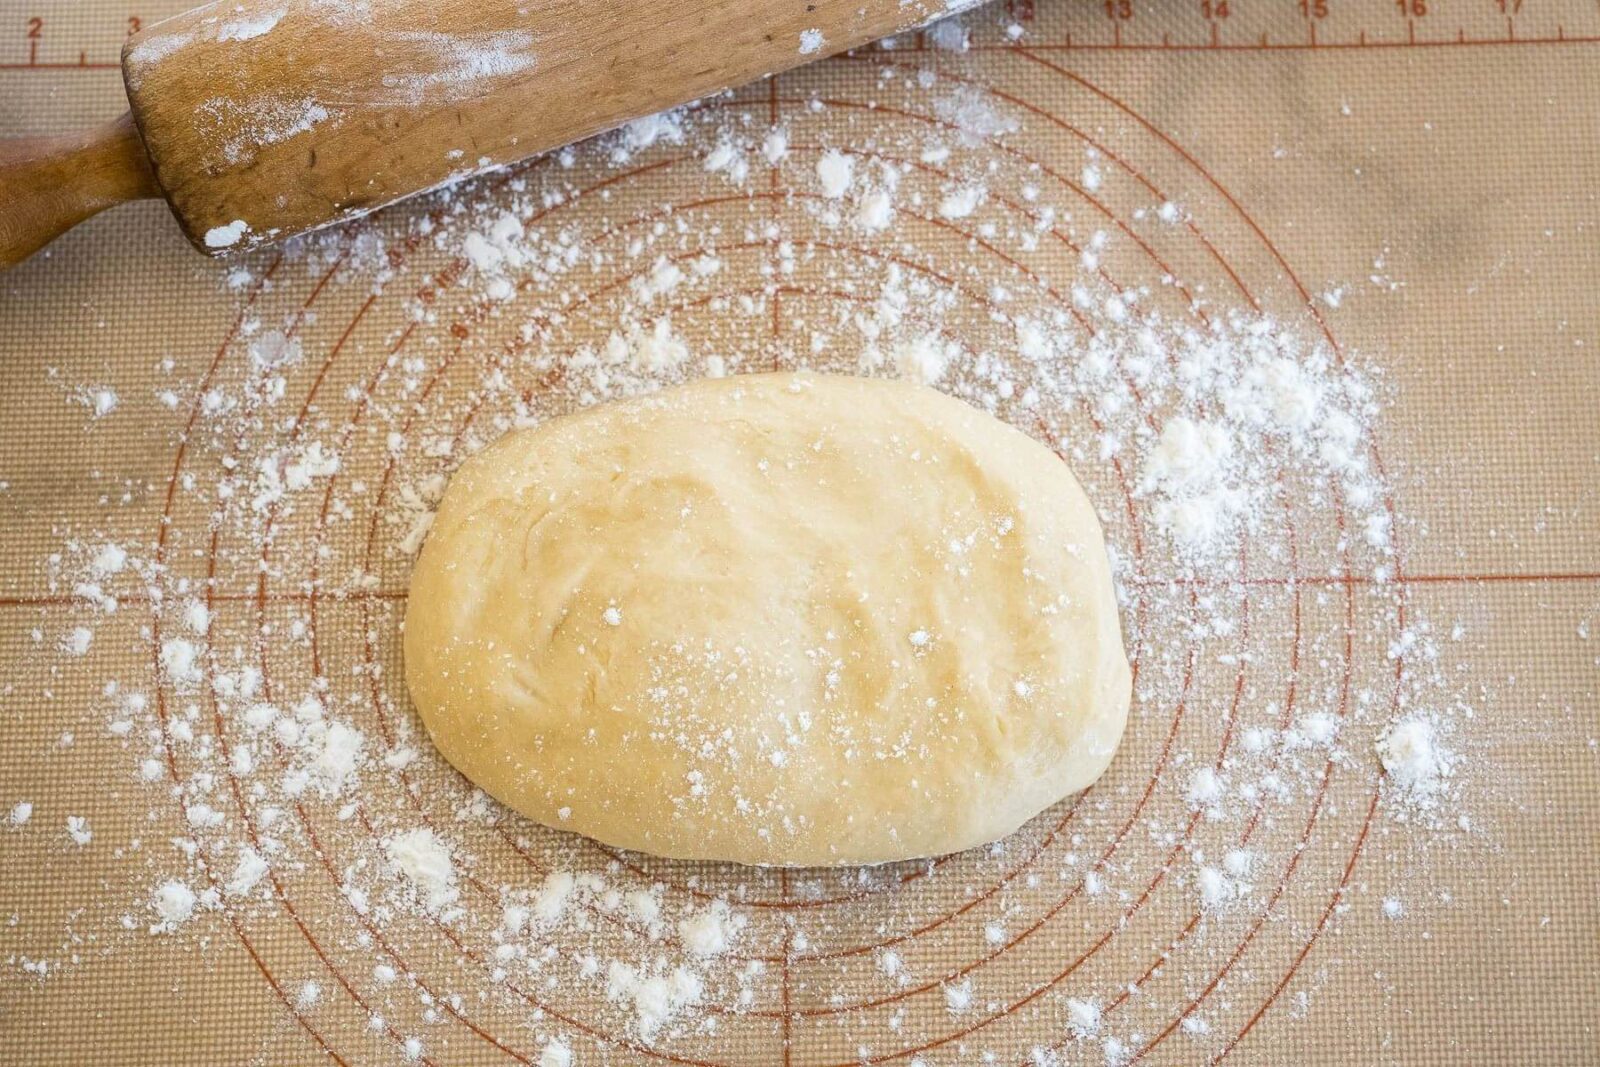 A puffy ball of dough sits on a floured surface next to a wooden rolling pin.